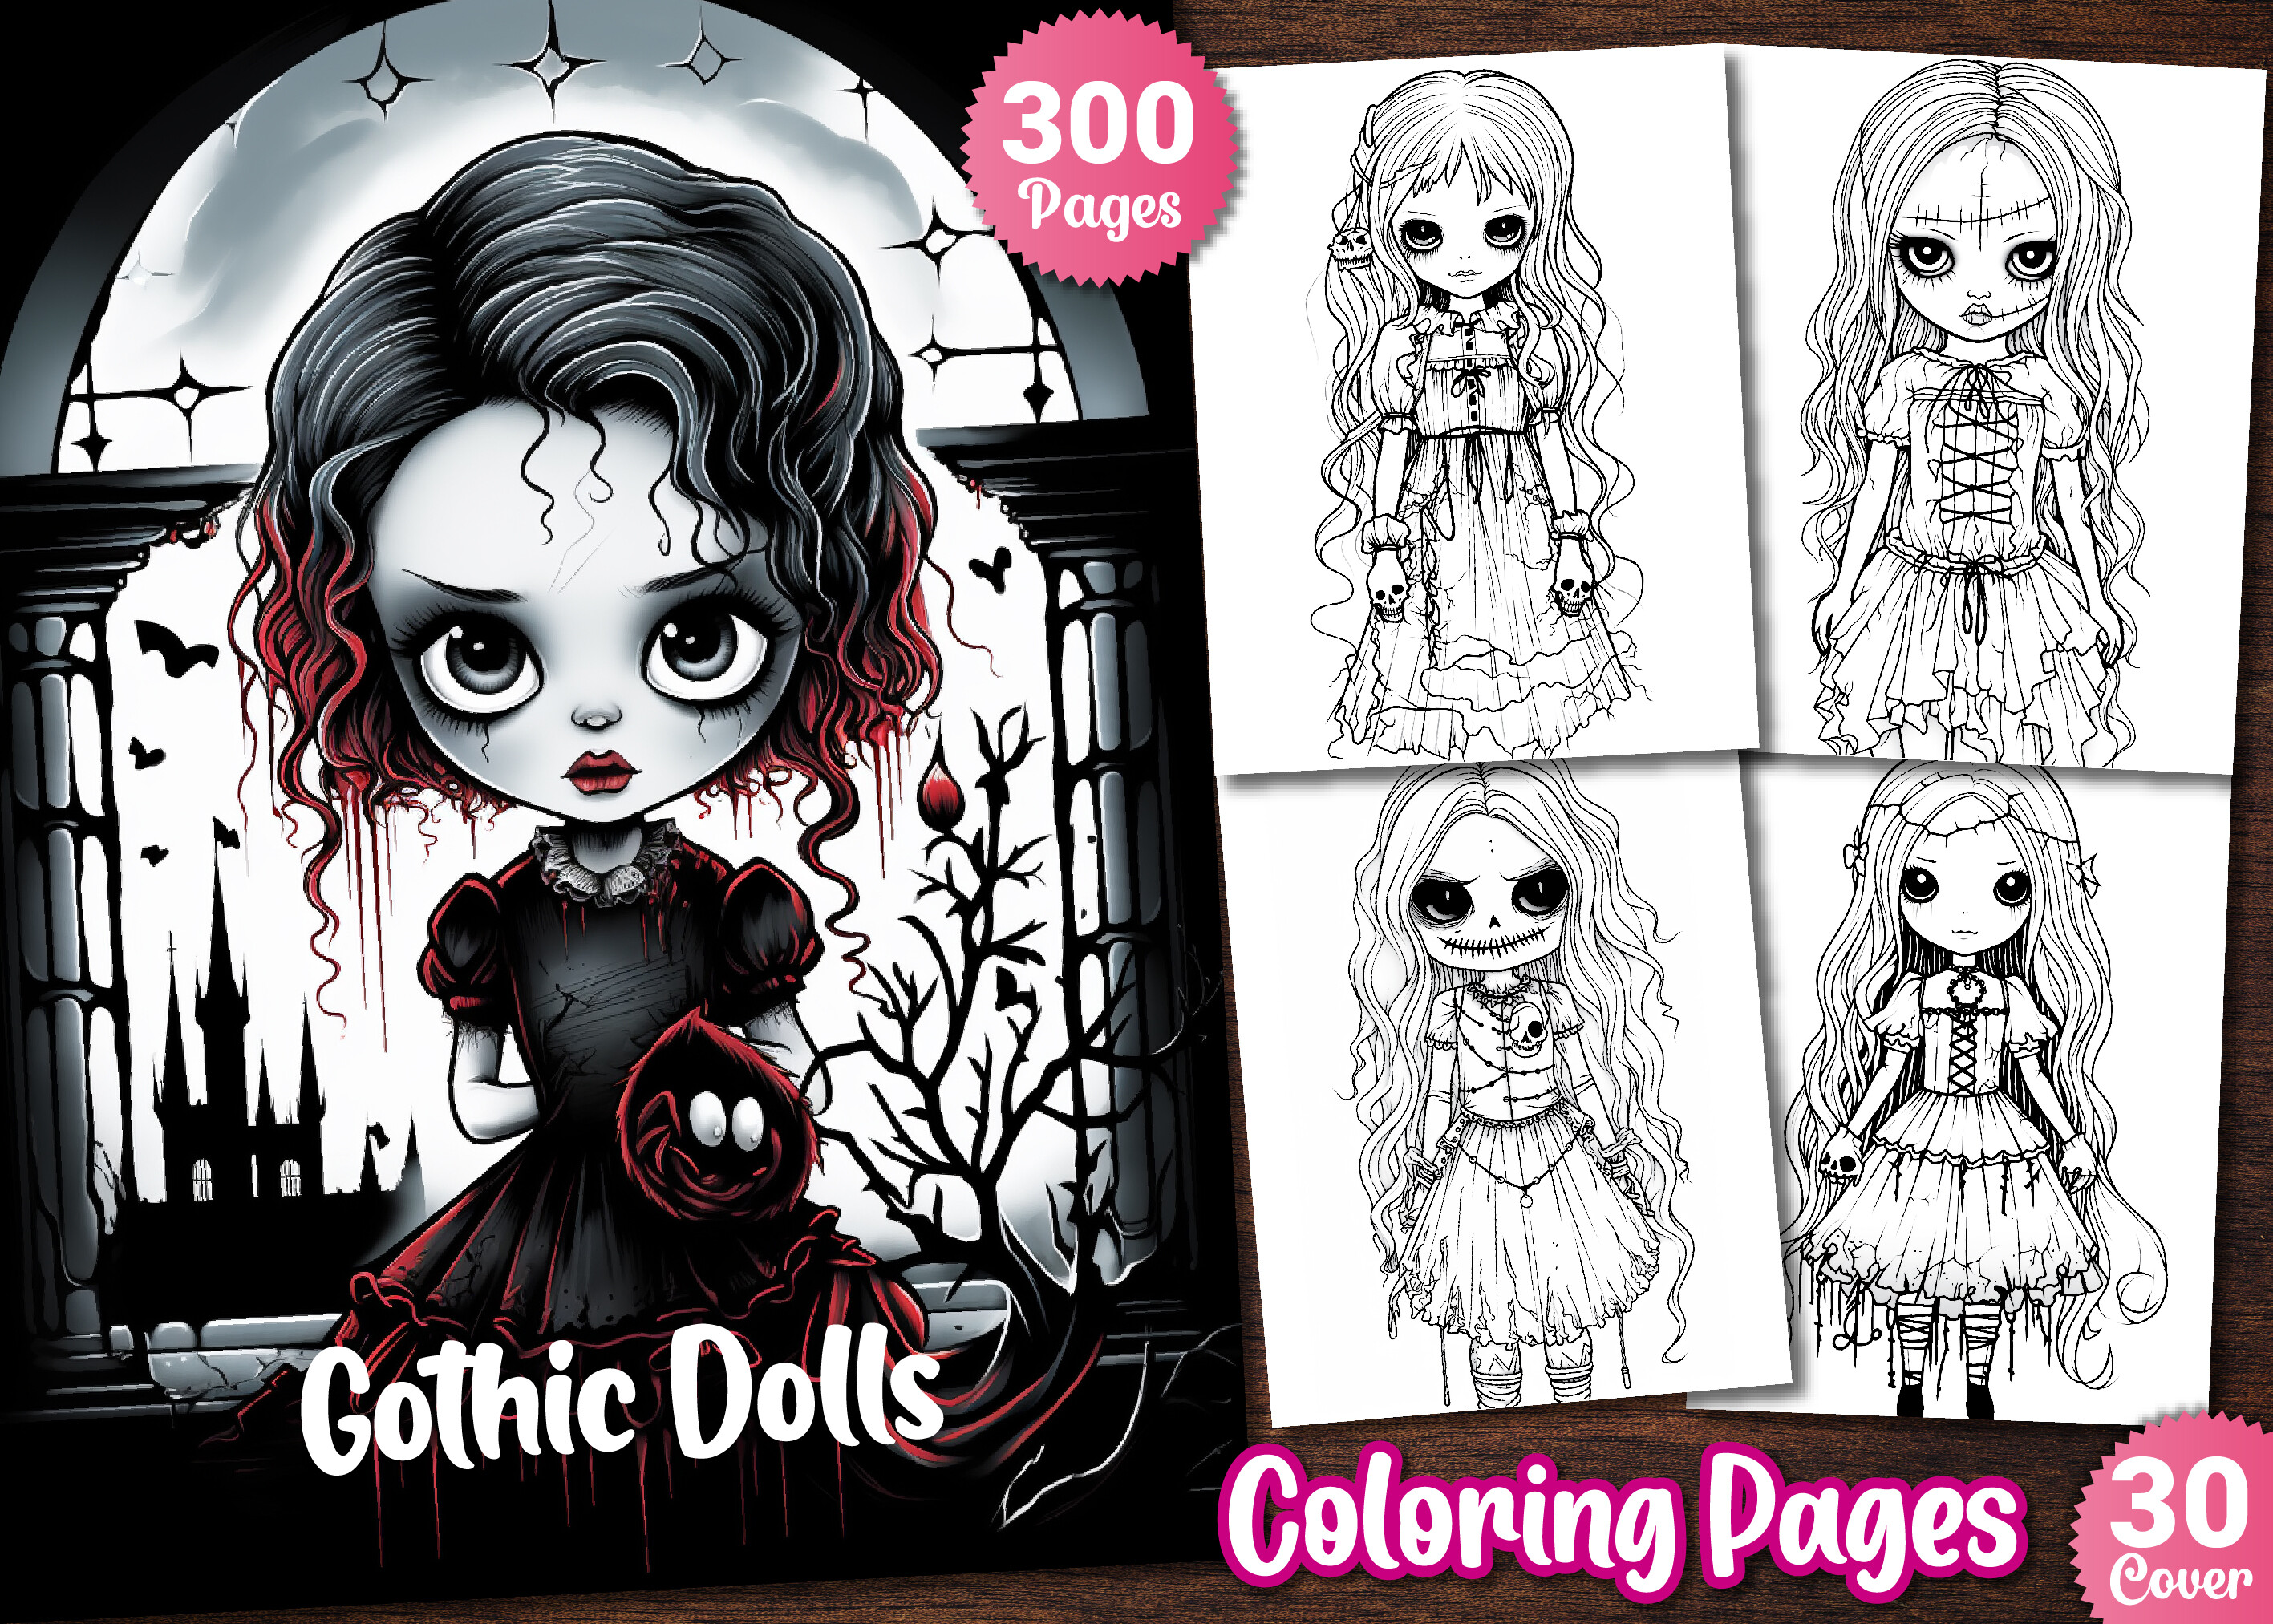 300 Gothic Dolls Coloring Pages KDP Graphic by WinSum Art · Creative ...